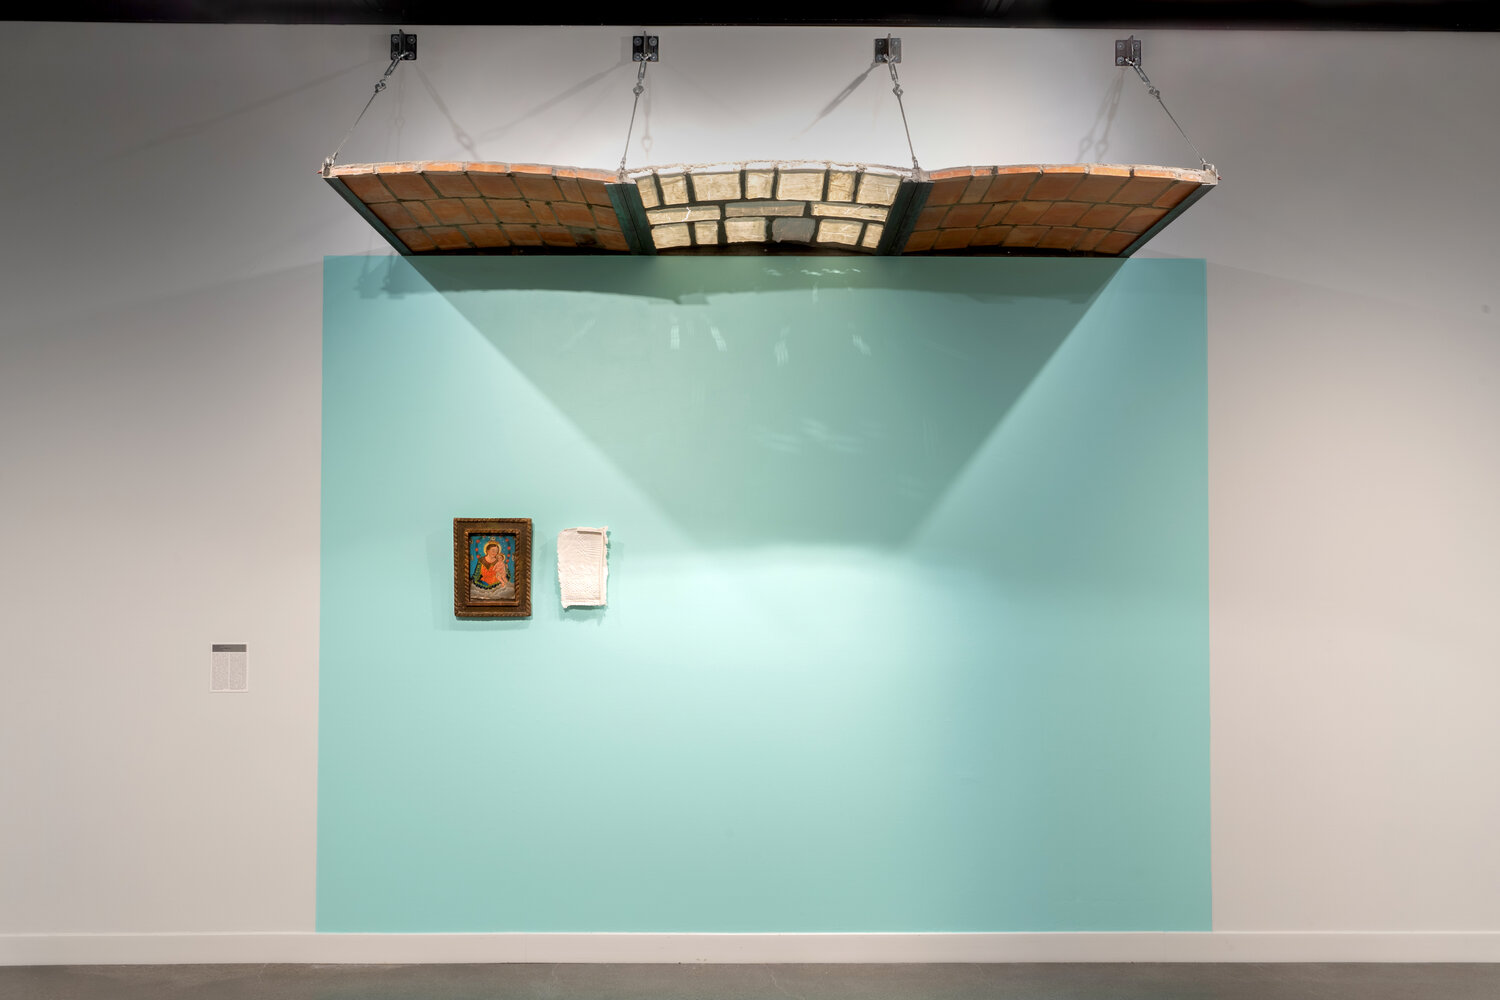 Made with clay, steel, concrete and porcelain tiles, “Cleotilde,” by Daisy Quezada Ureña, was part of the New Mexico State University “Contemporary Ex-Voto: Devotion Beyond Medium” exhibition in 2022.